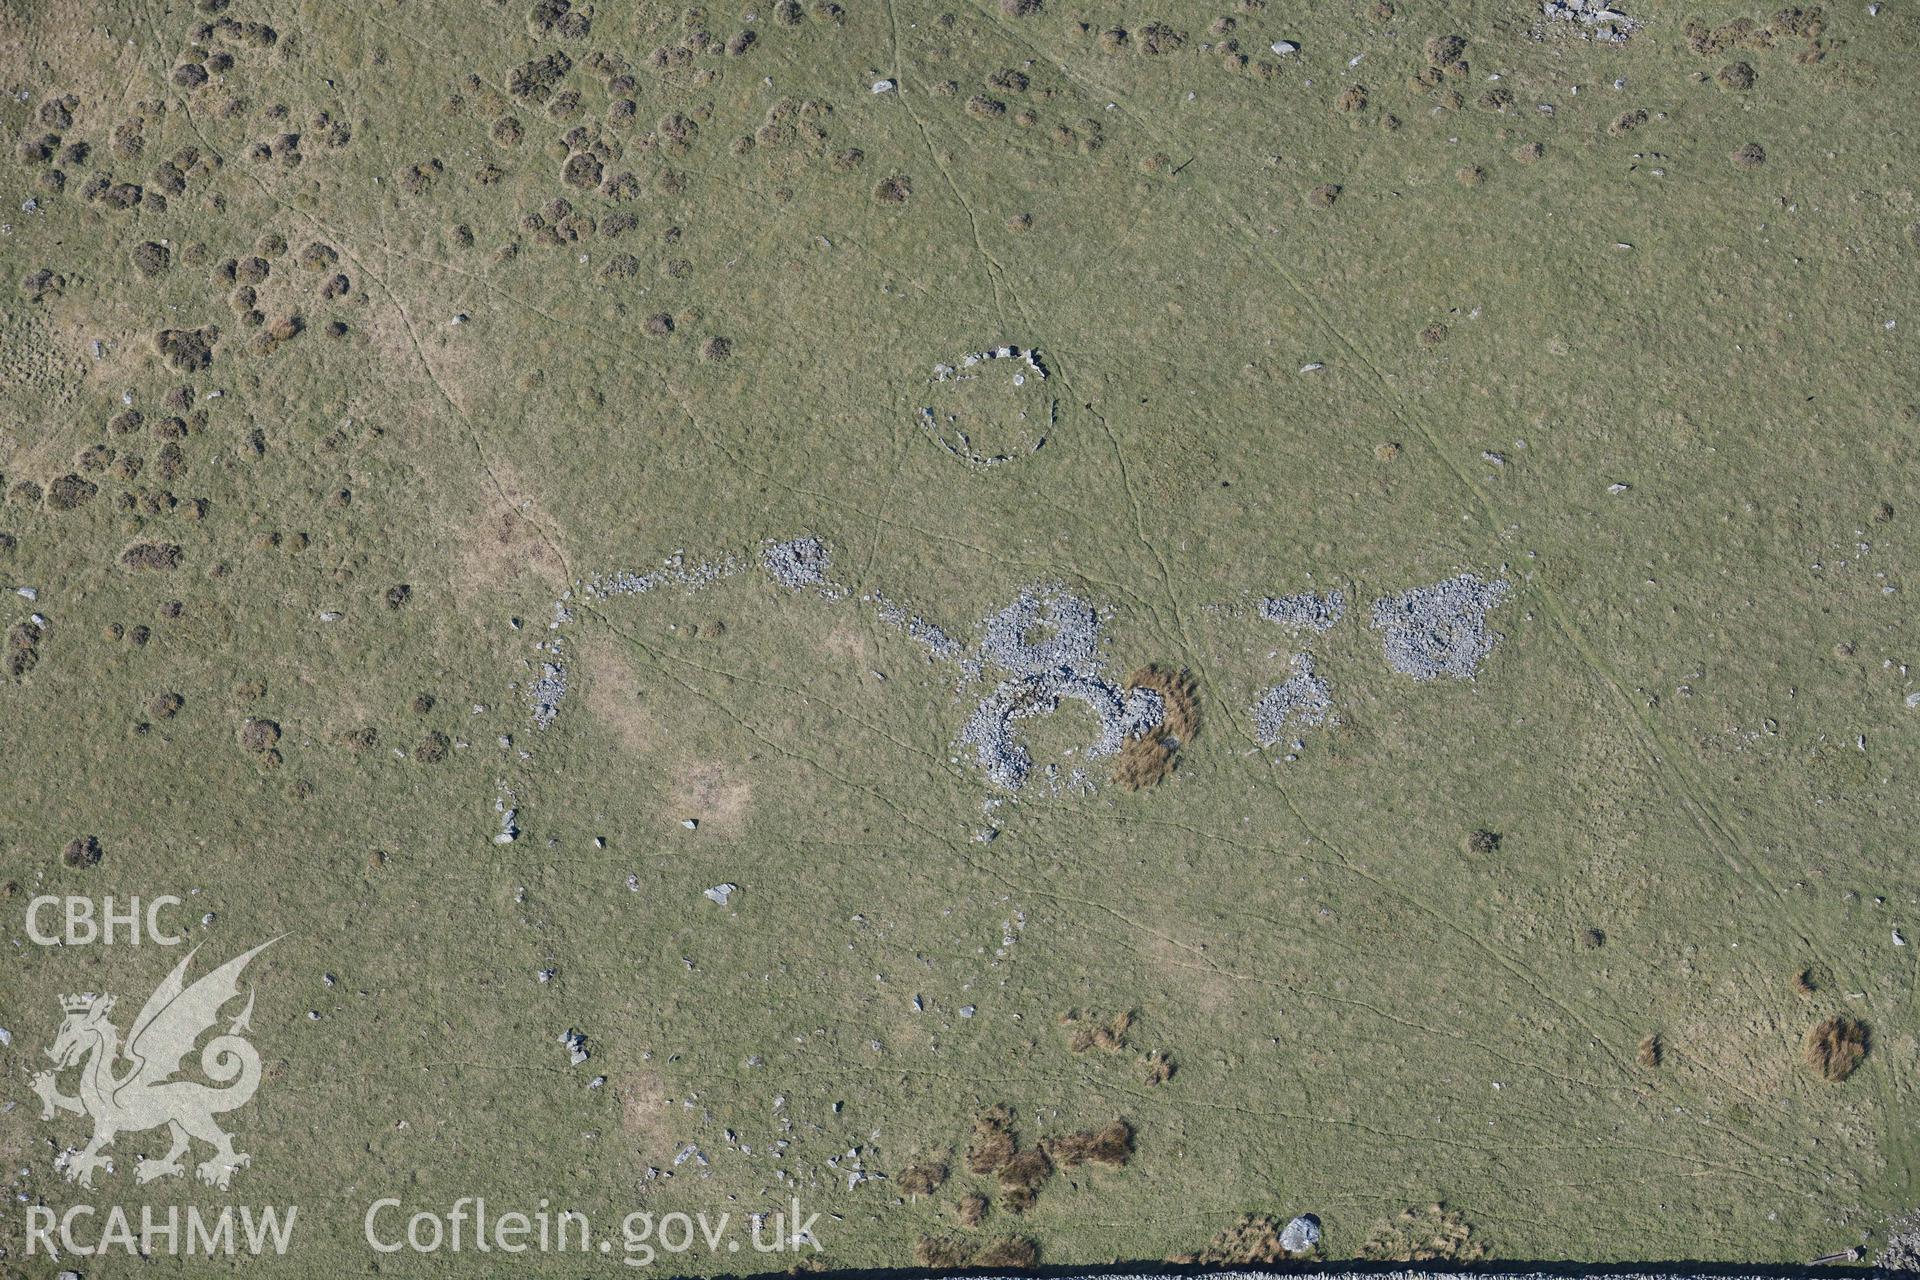 Mynydd Egryn hut circle settlement and Hengwm cairn circle. Oblique aerial photographs taken during the Royal Commission’s programme of archaeological aerial reconnaissance by Toby Driver on 25 March 2022.